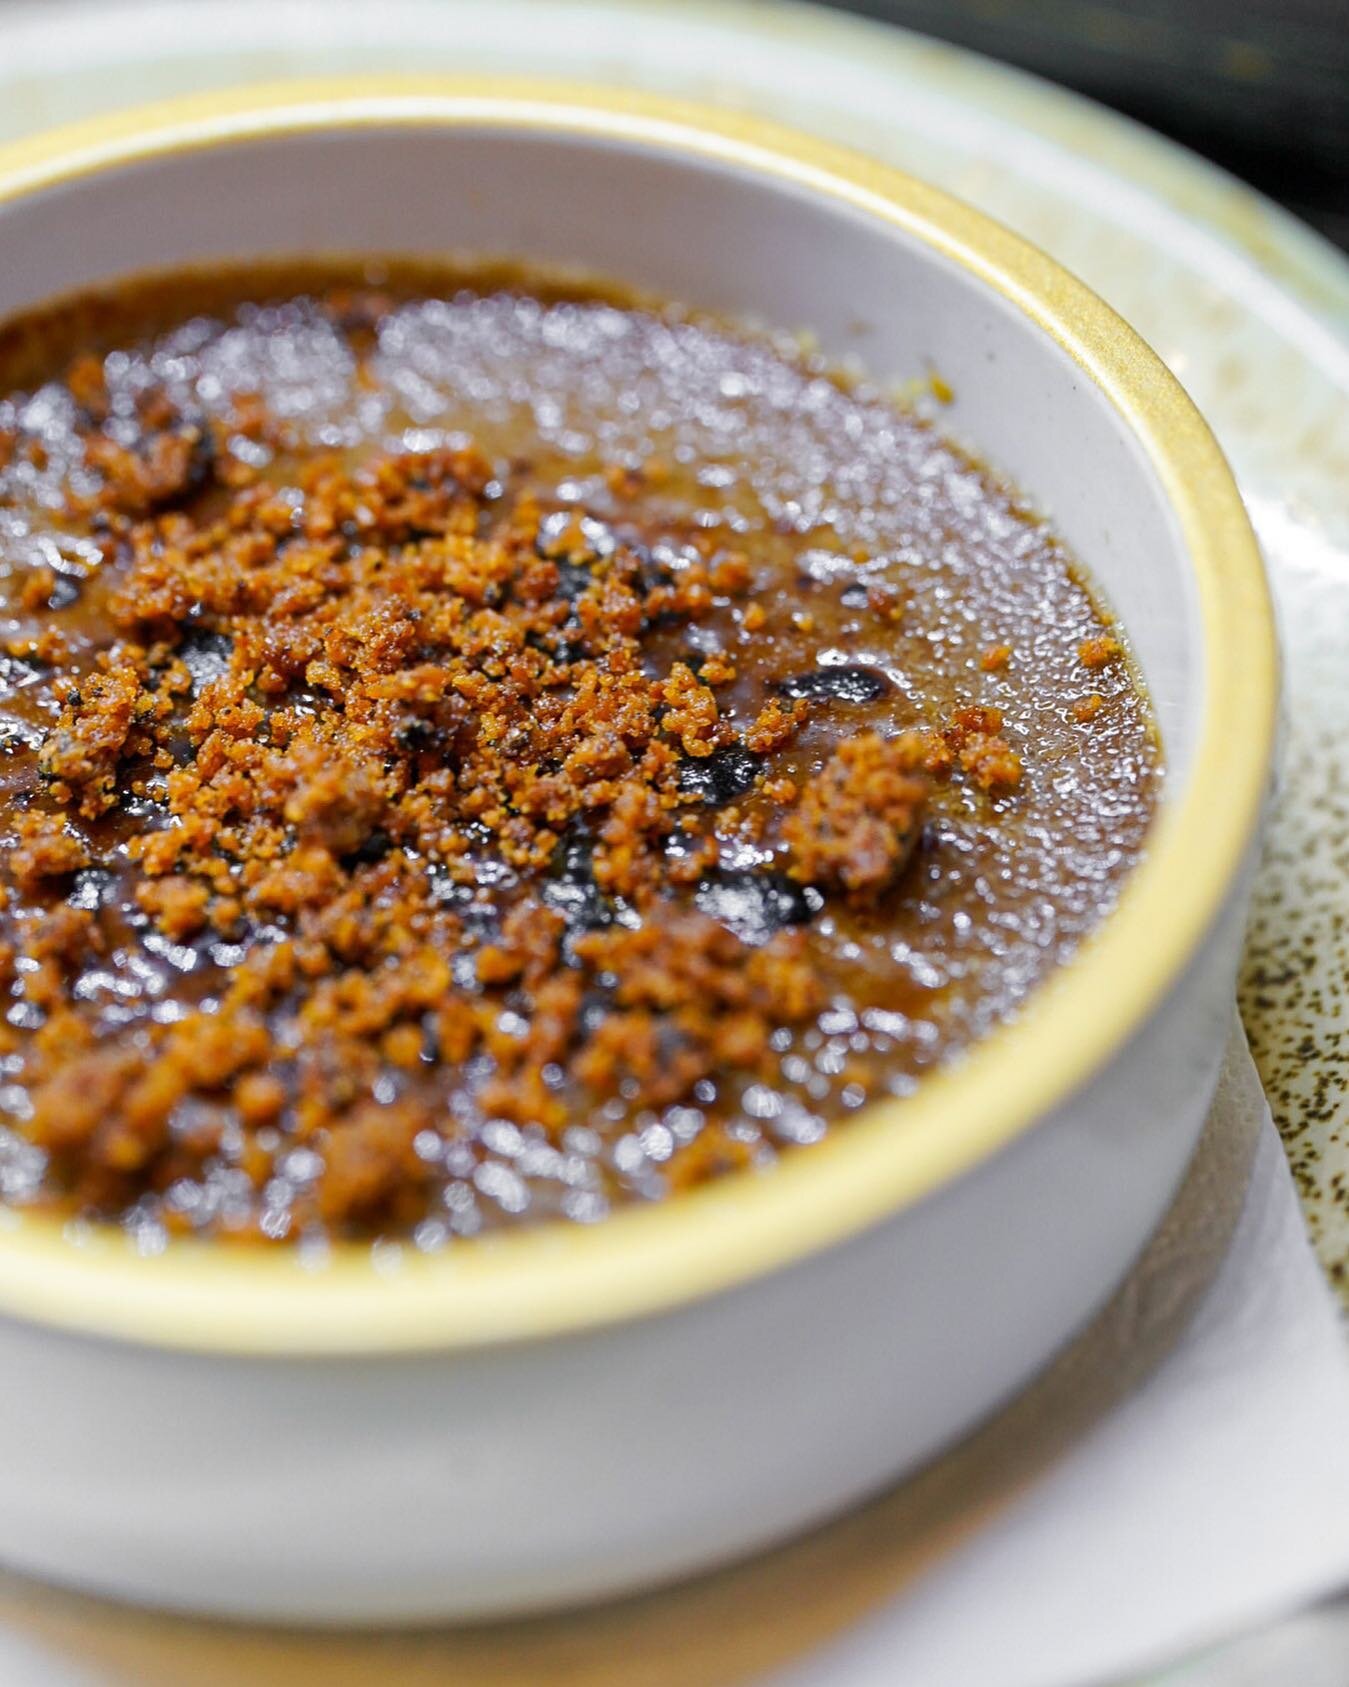 COFFEE CR&Egrave;ME BR&Ucirc;L&Eacute;E (Fall Menu)

Finish off your meal with our vietnamese coffee creme br&ucirc;l&eacute;e! Topped with coffee crumbs